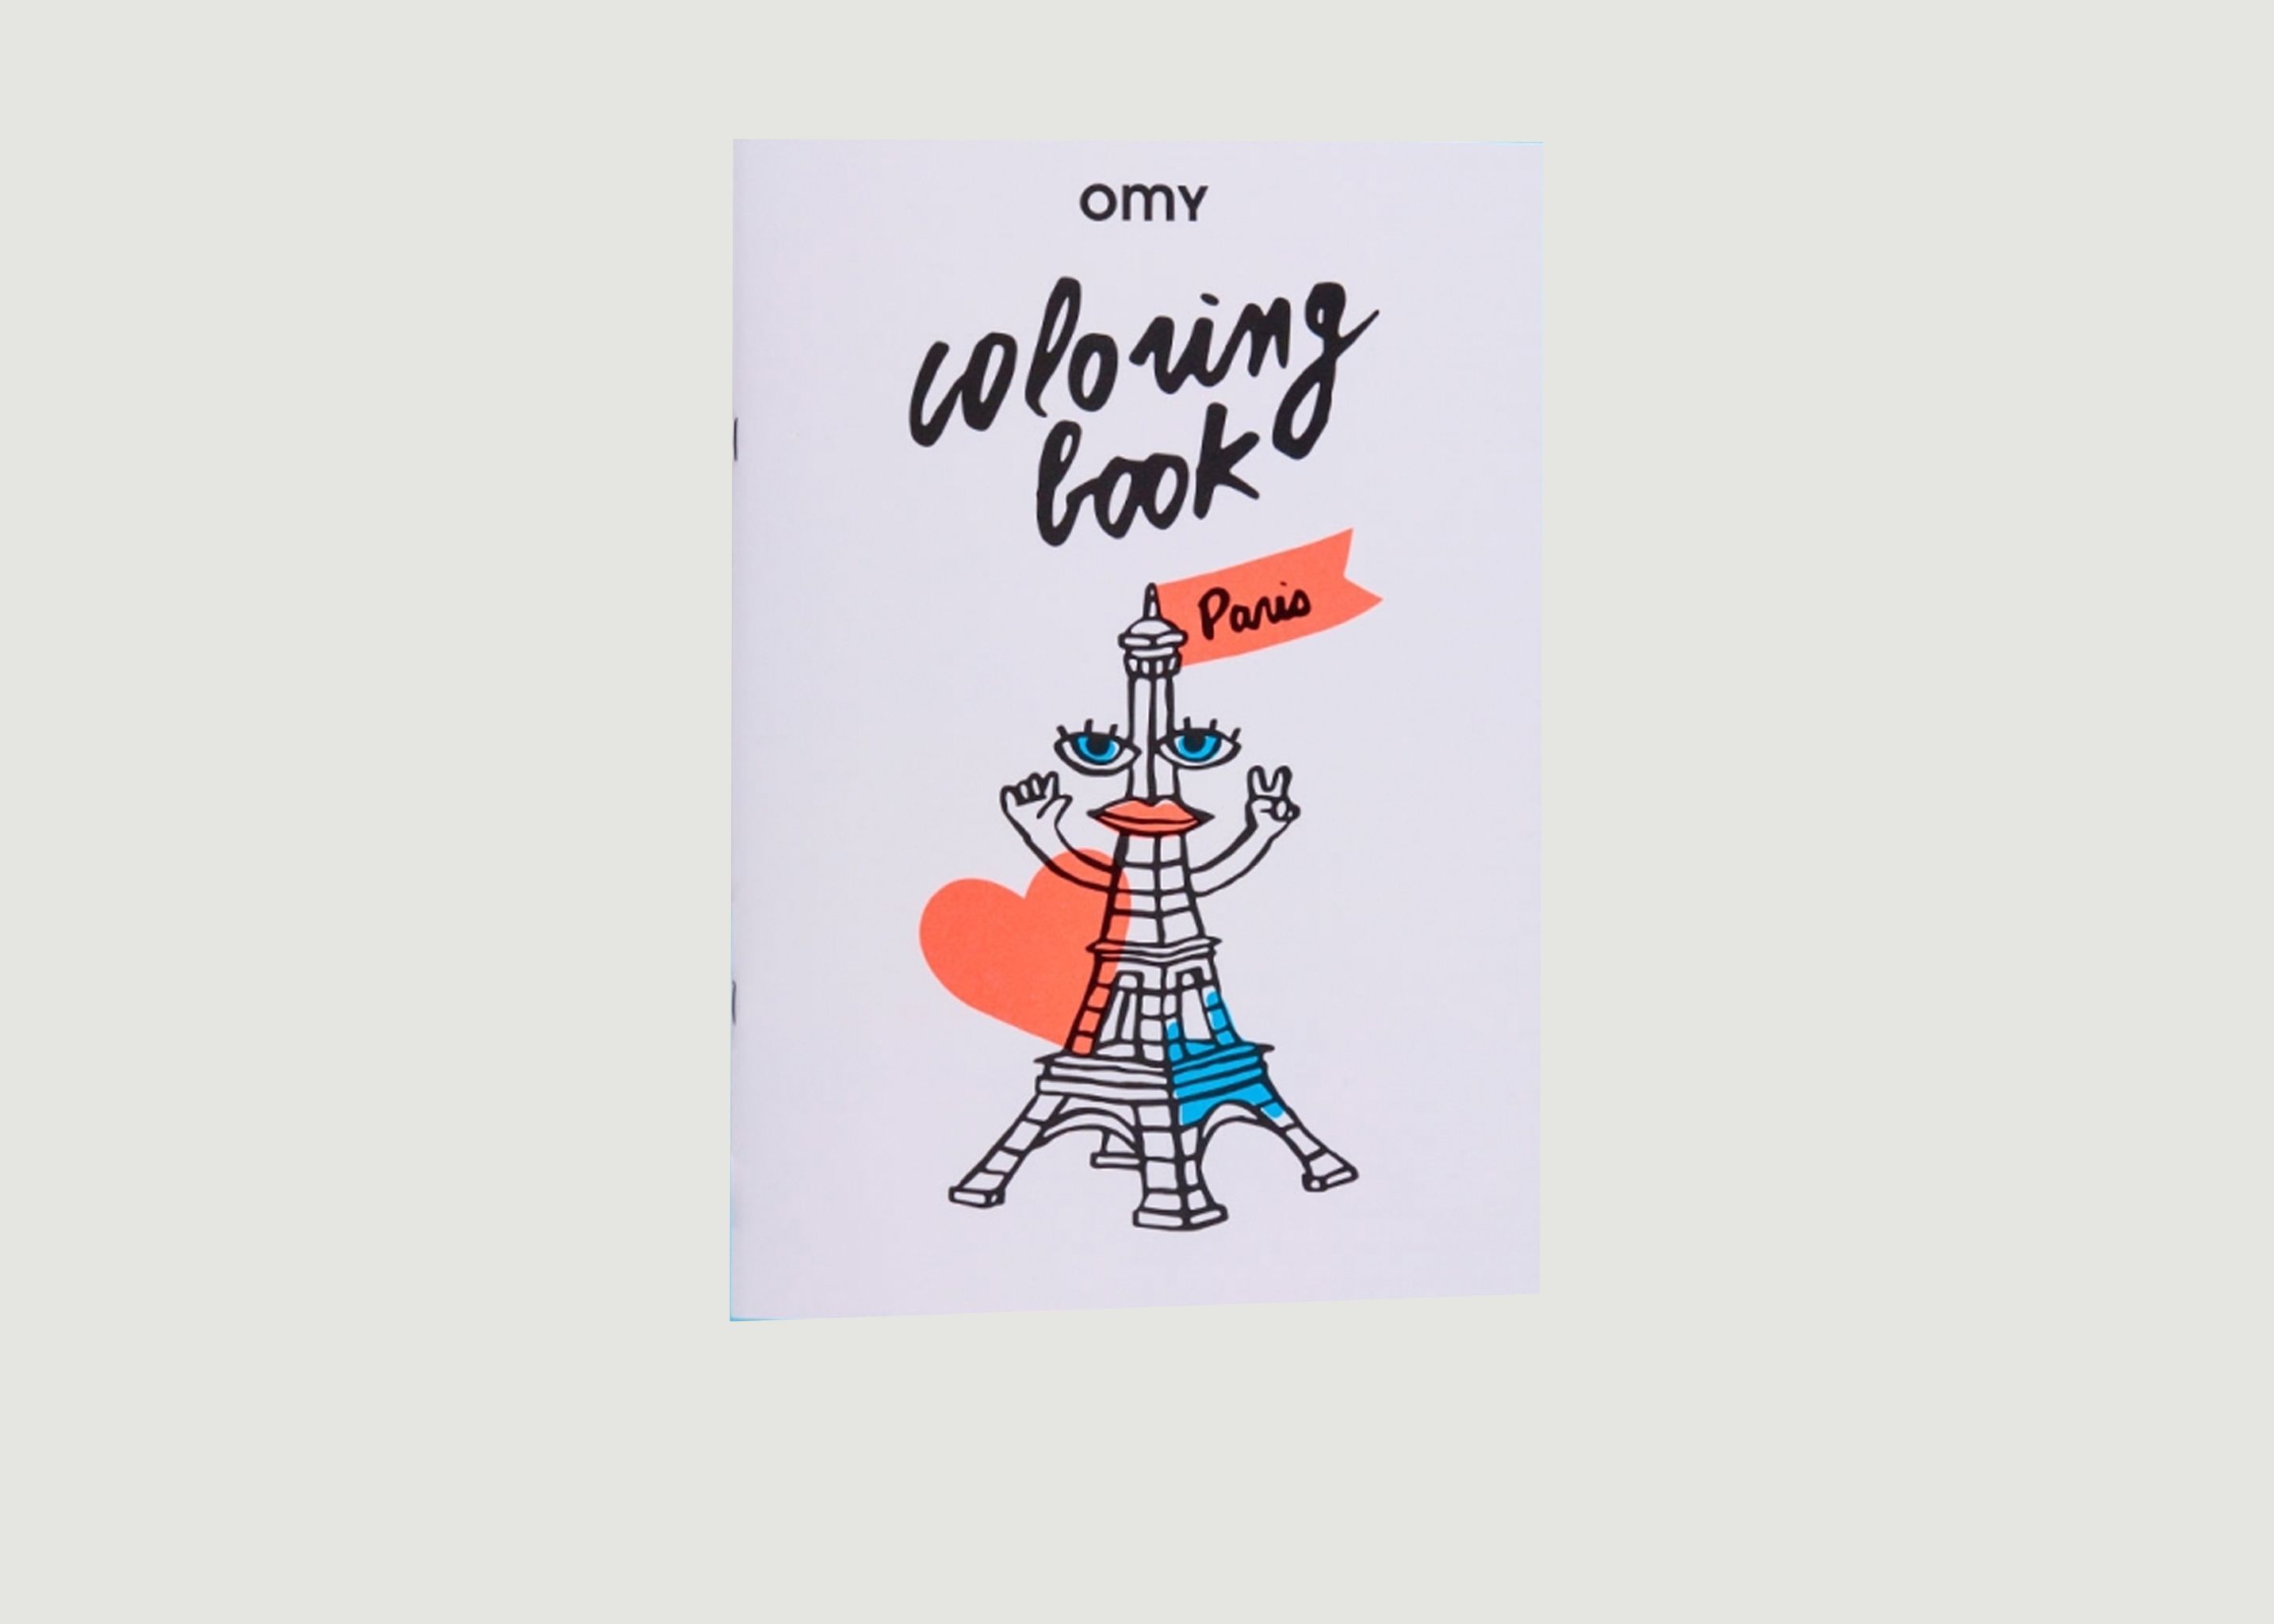 Paris colouring notebook - Omy